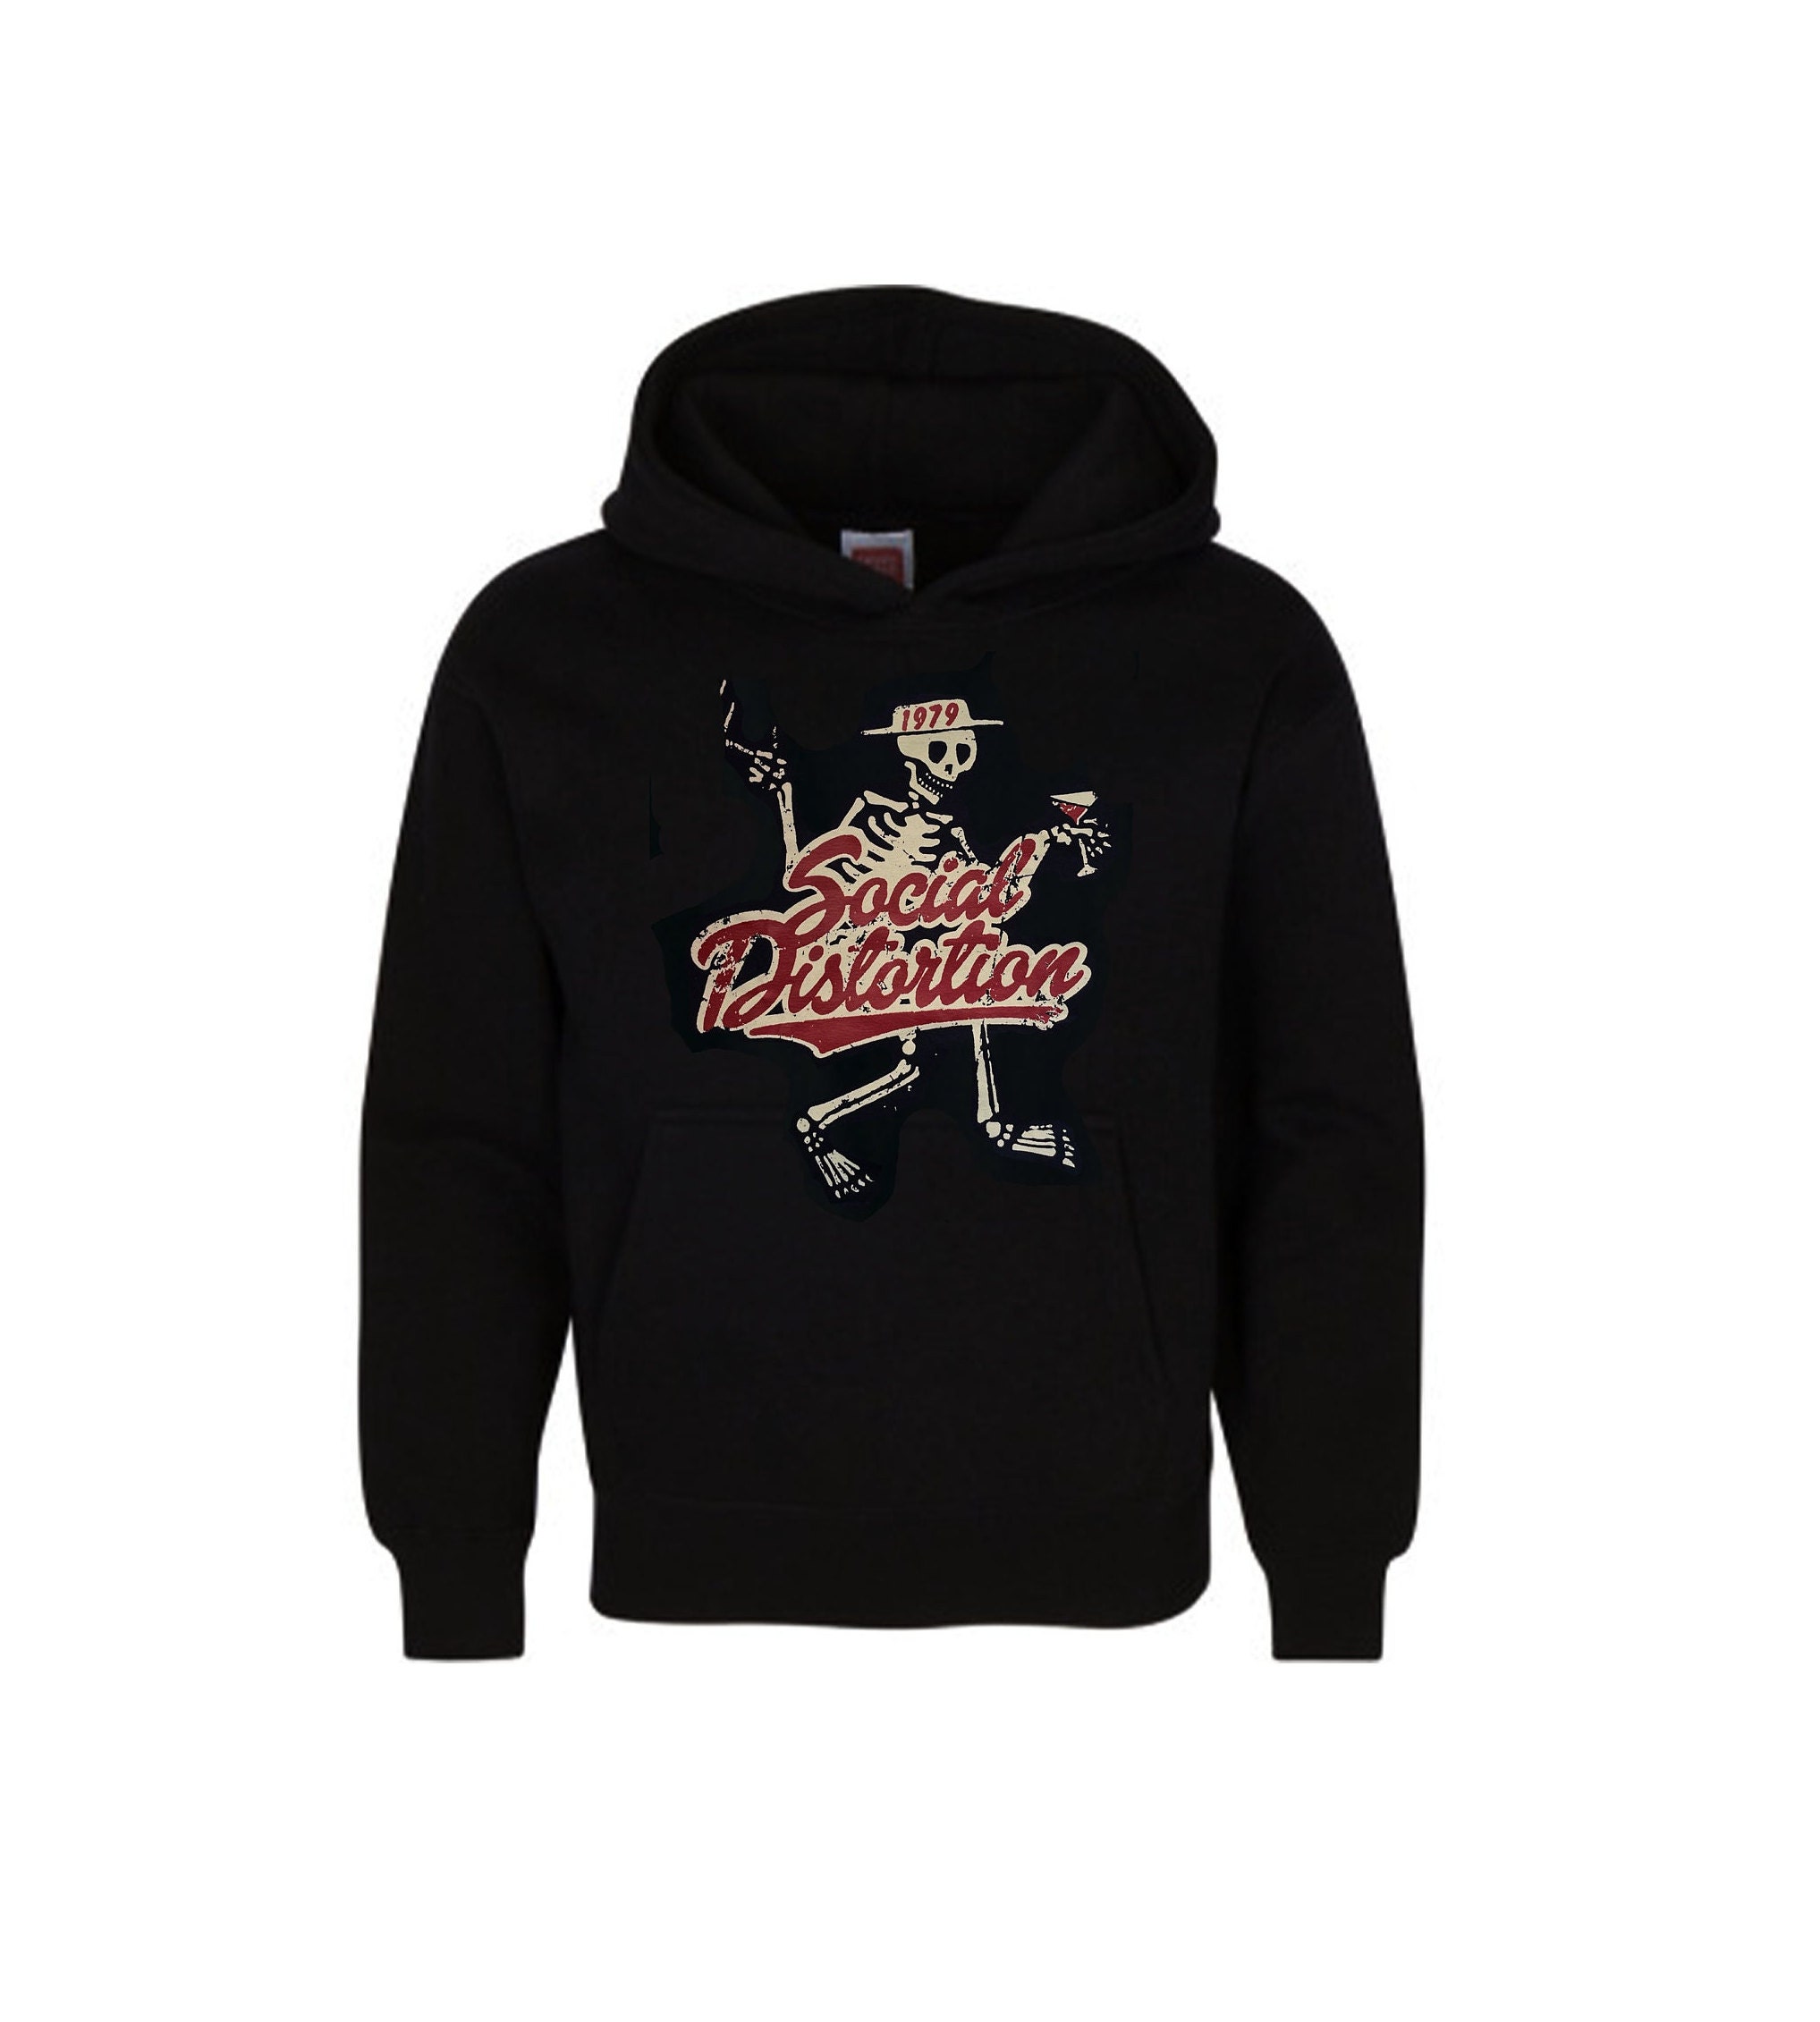 Discover Punk rock band SOCIAL DISTORTION#1 HOODIE